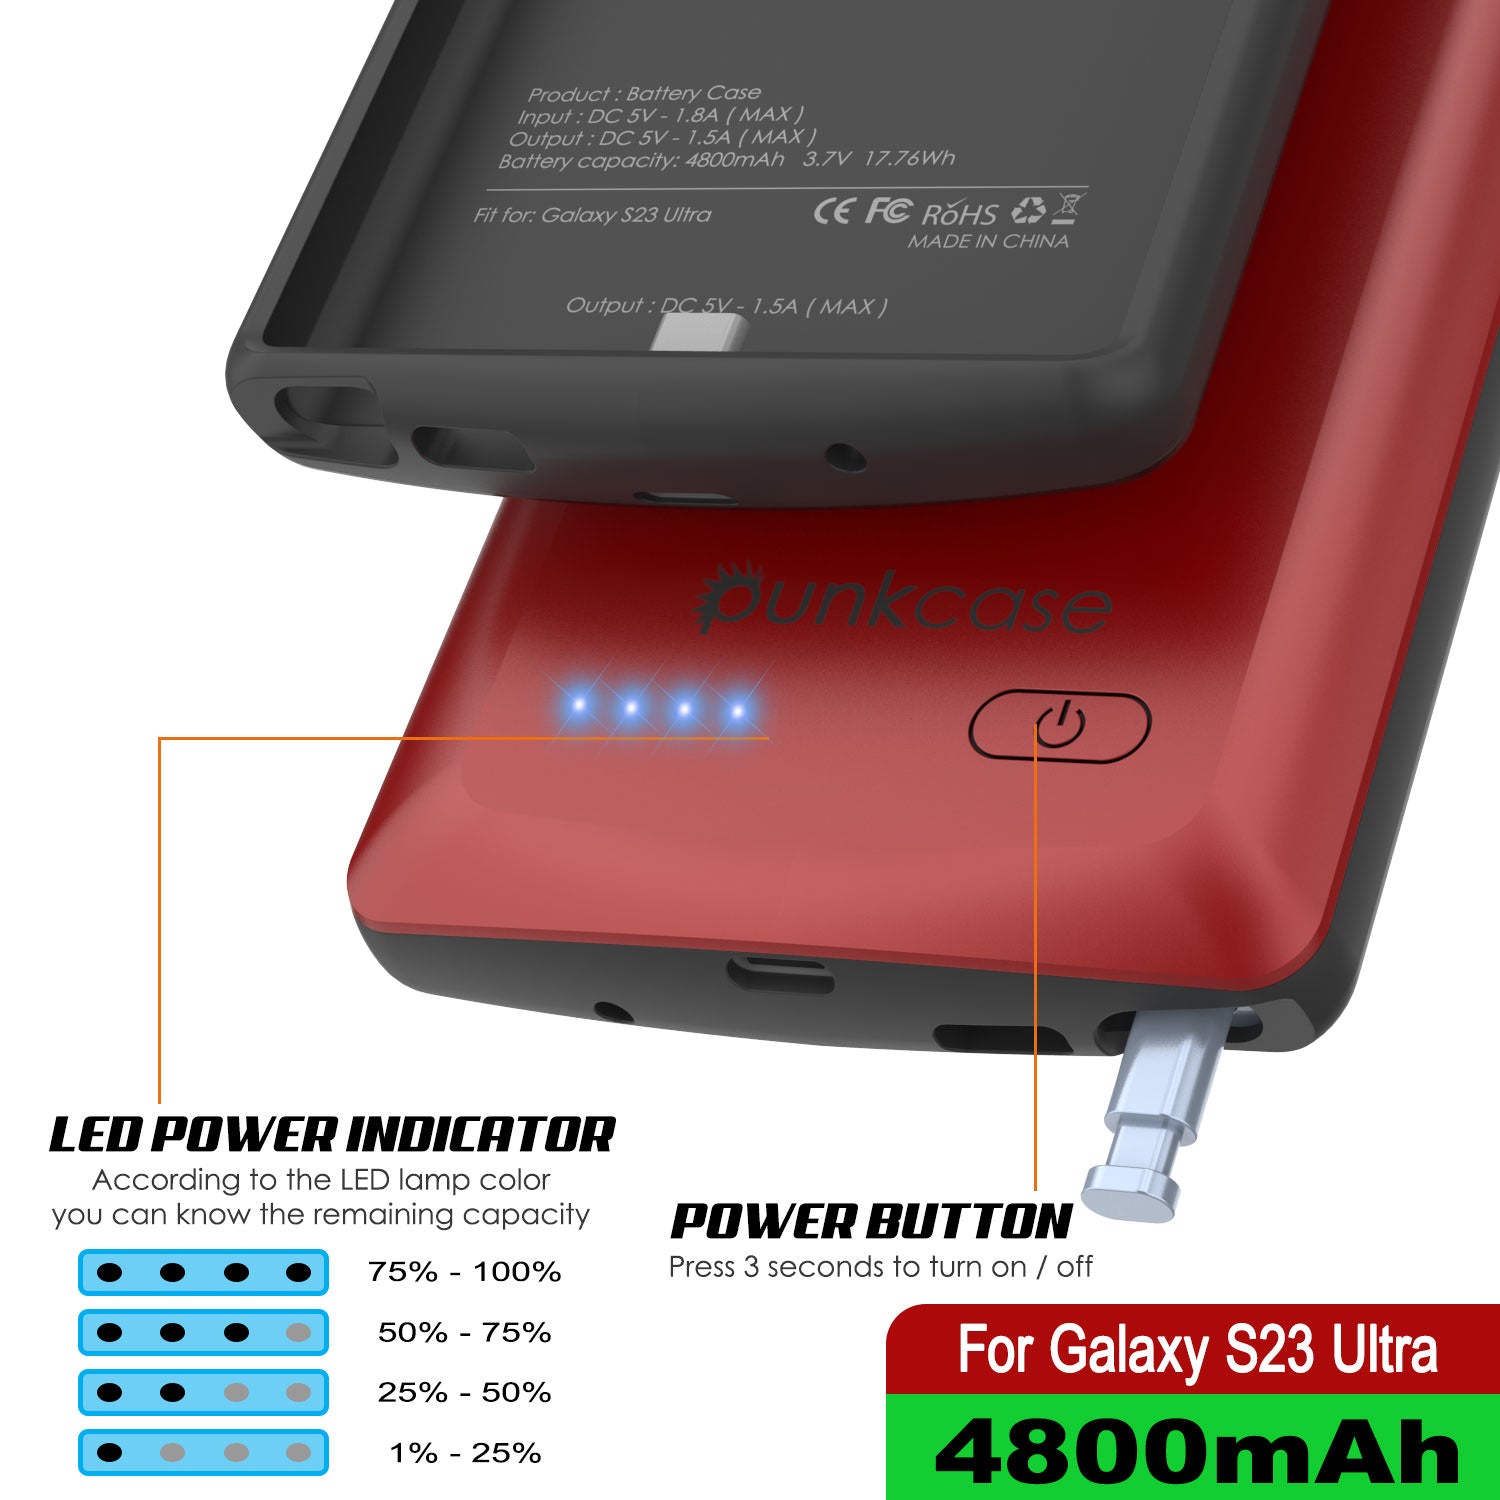 PunkJuice S23 Ultra Battery Case Red - Portable Charging Power Juice Bank with 4800mAh